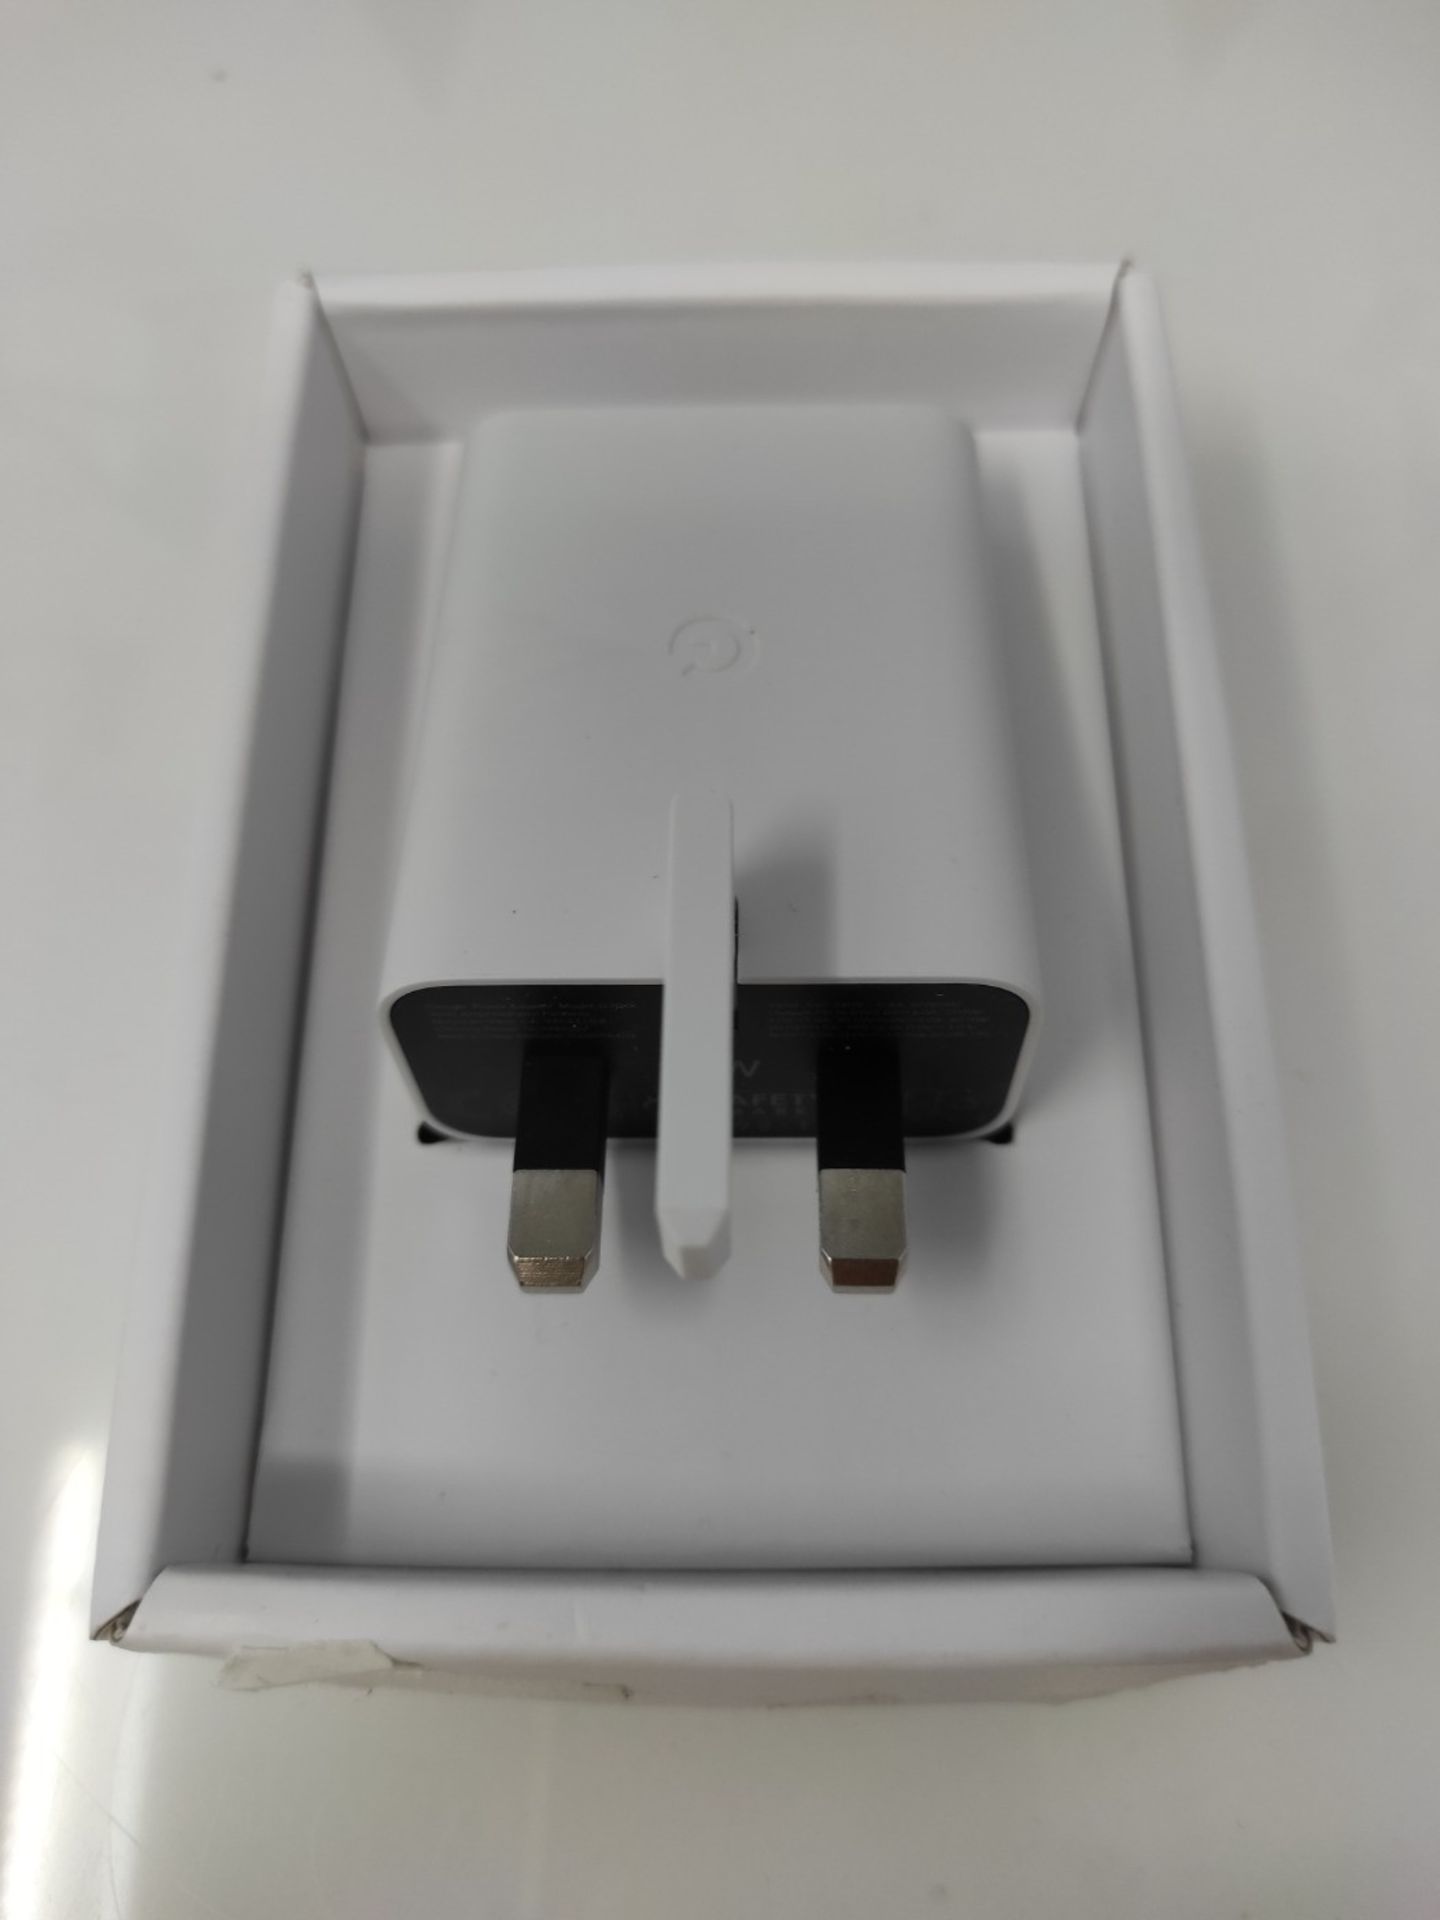 Google Pixel 2021 Charger White - Image 2 of 2